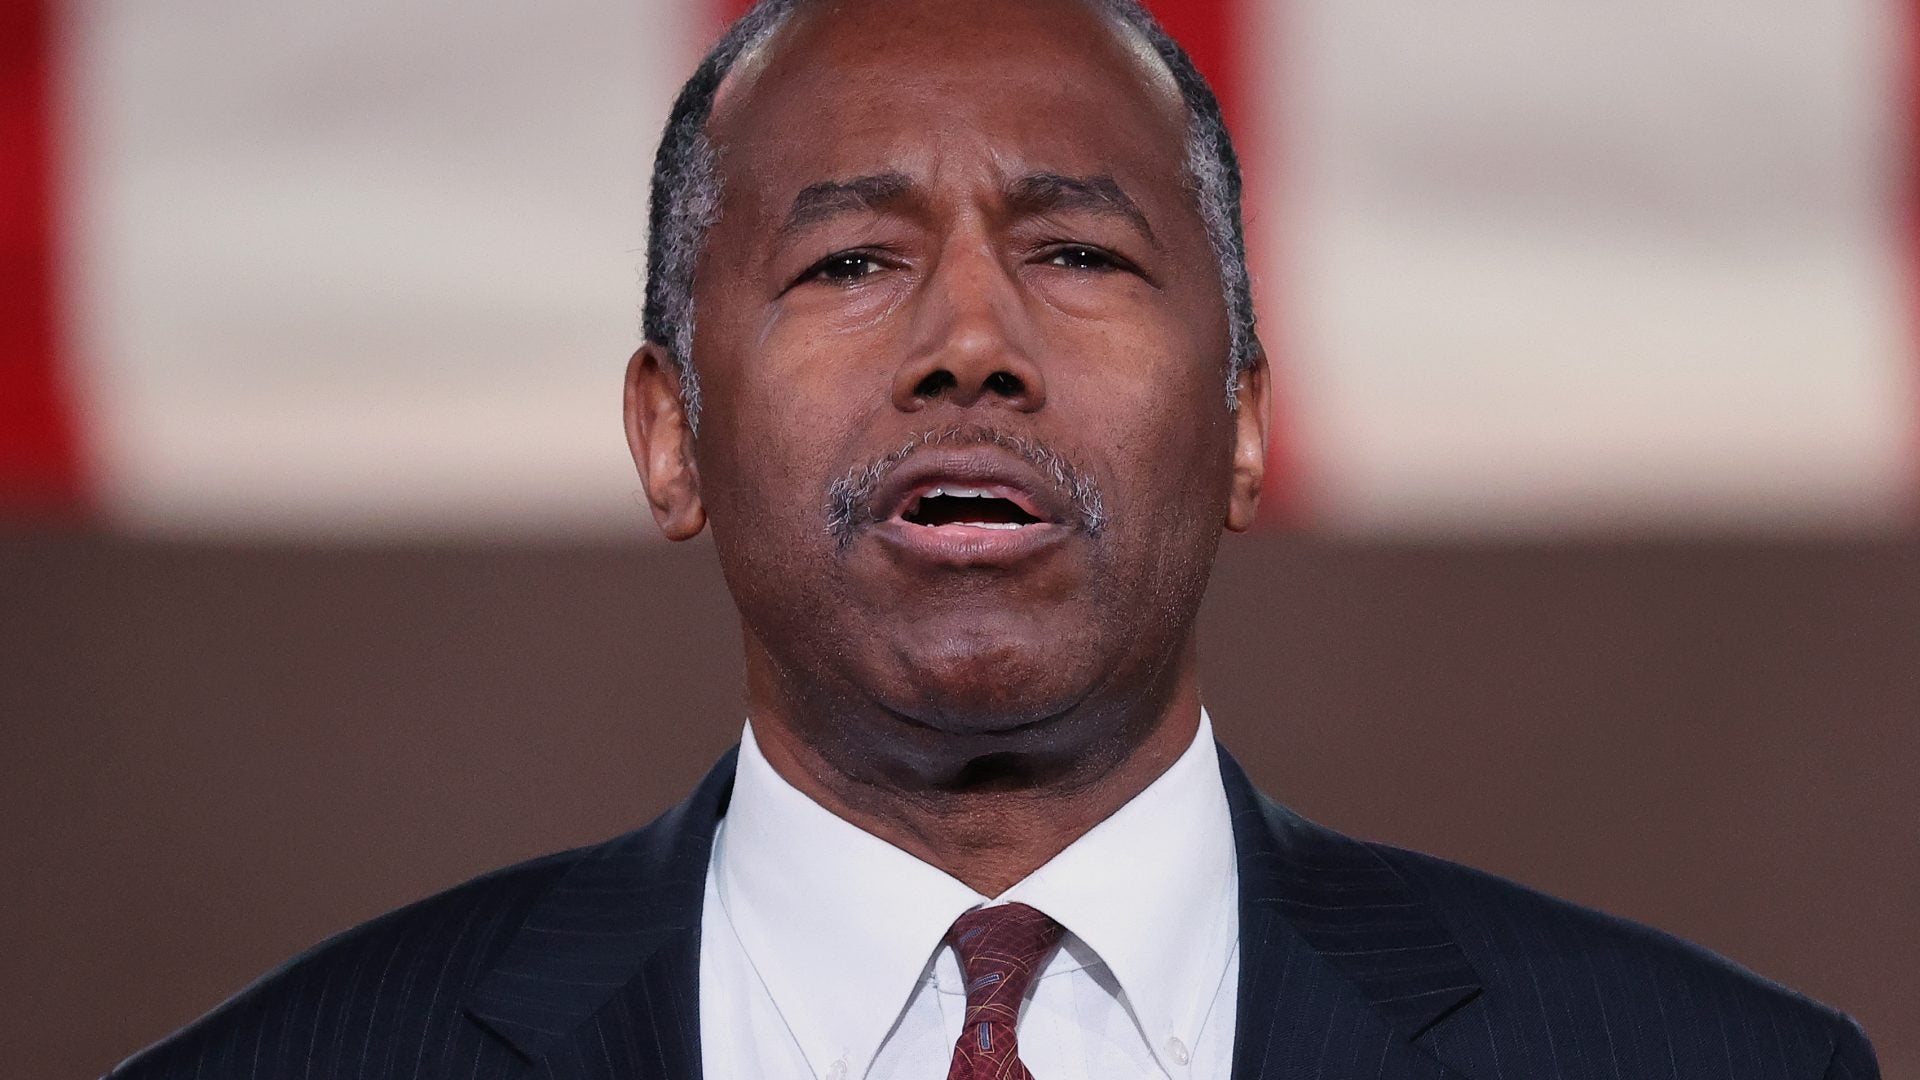 Ben Carson: I'm Convinced Experimental COVID-19 Treatment Trump Also Used Saved My Life